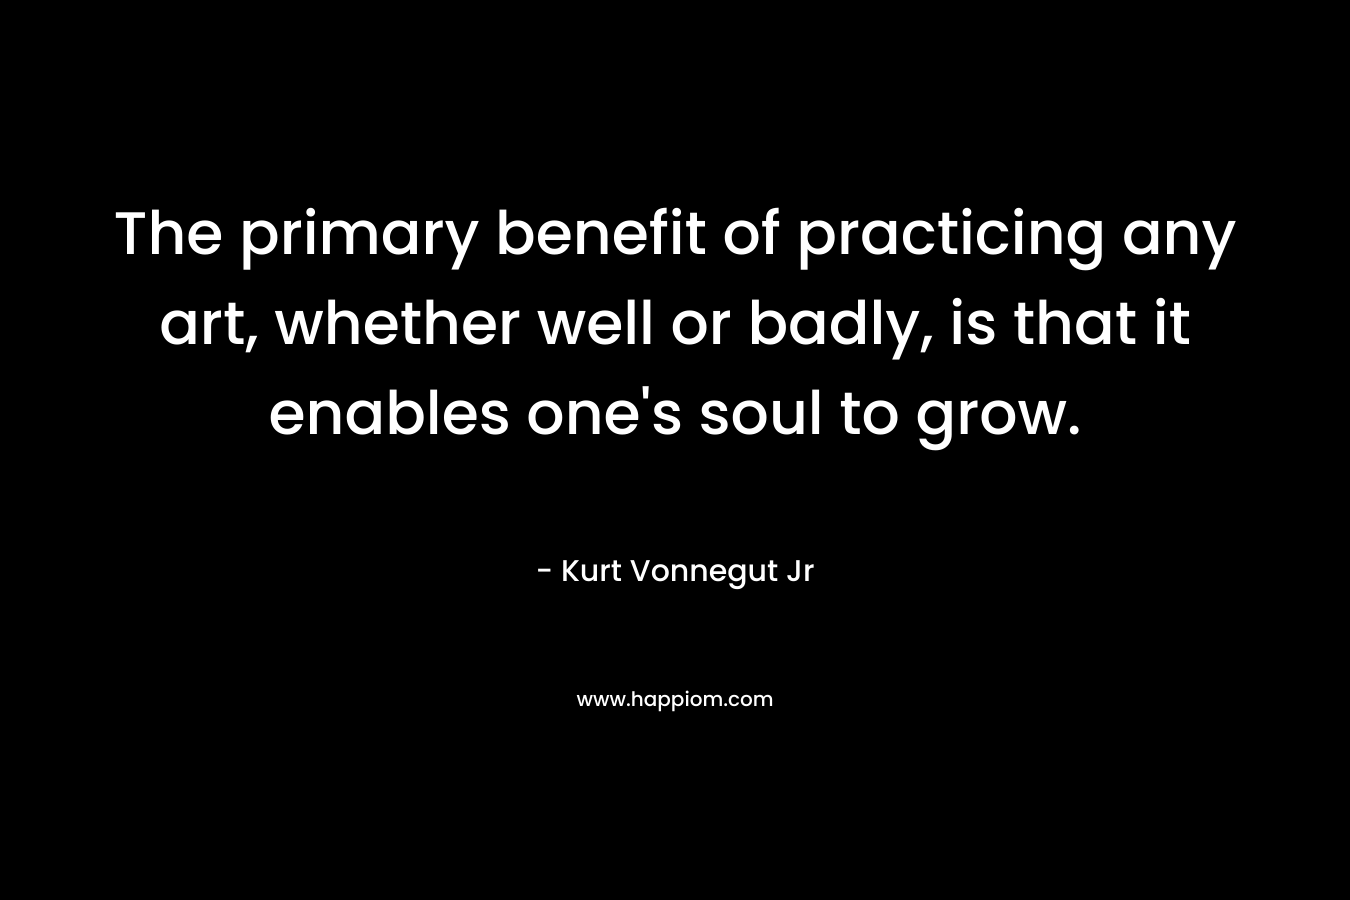 The primary benefit of practicing any art, whether well or badly, is that it enables one's soul to grow.